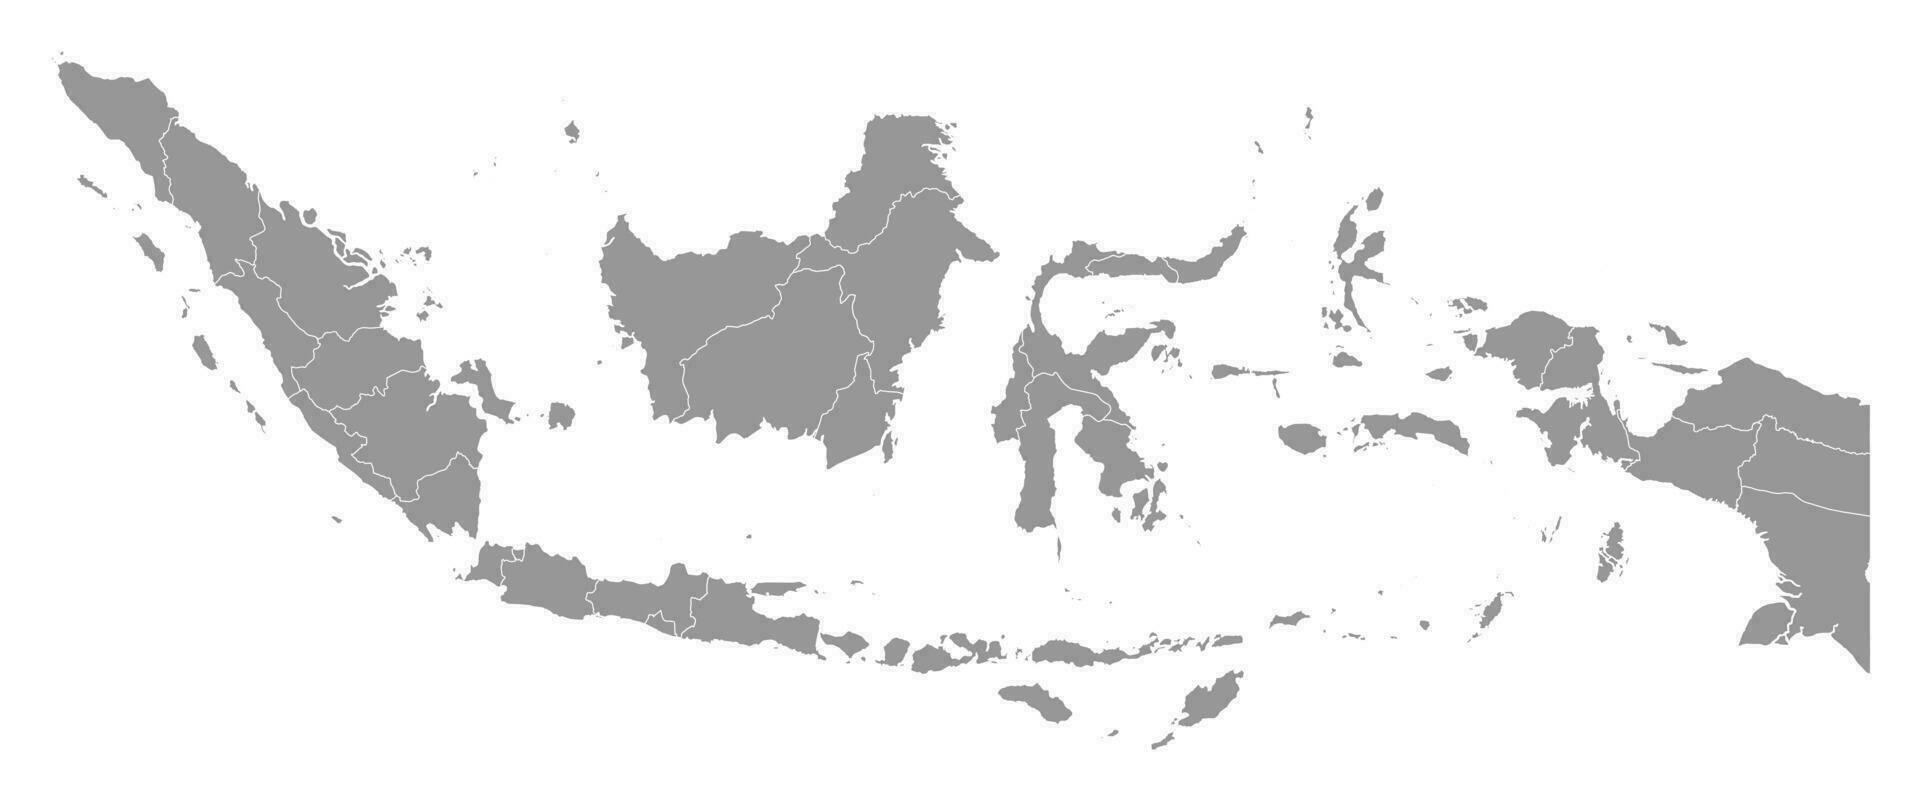 Indonesia map with administrative divisions. Vector illustration.